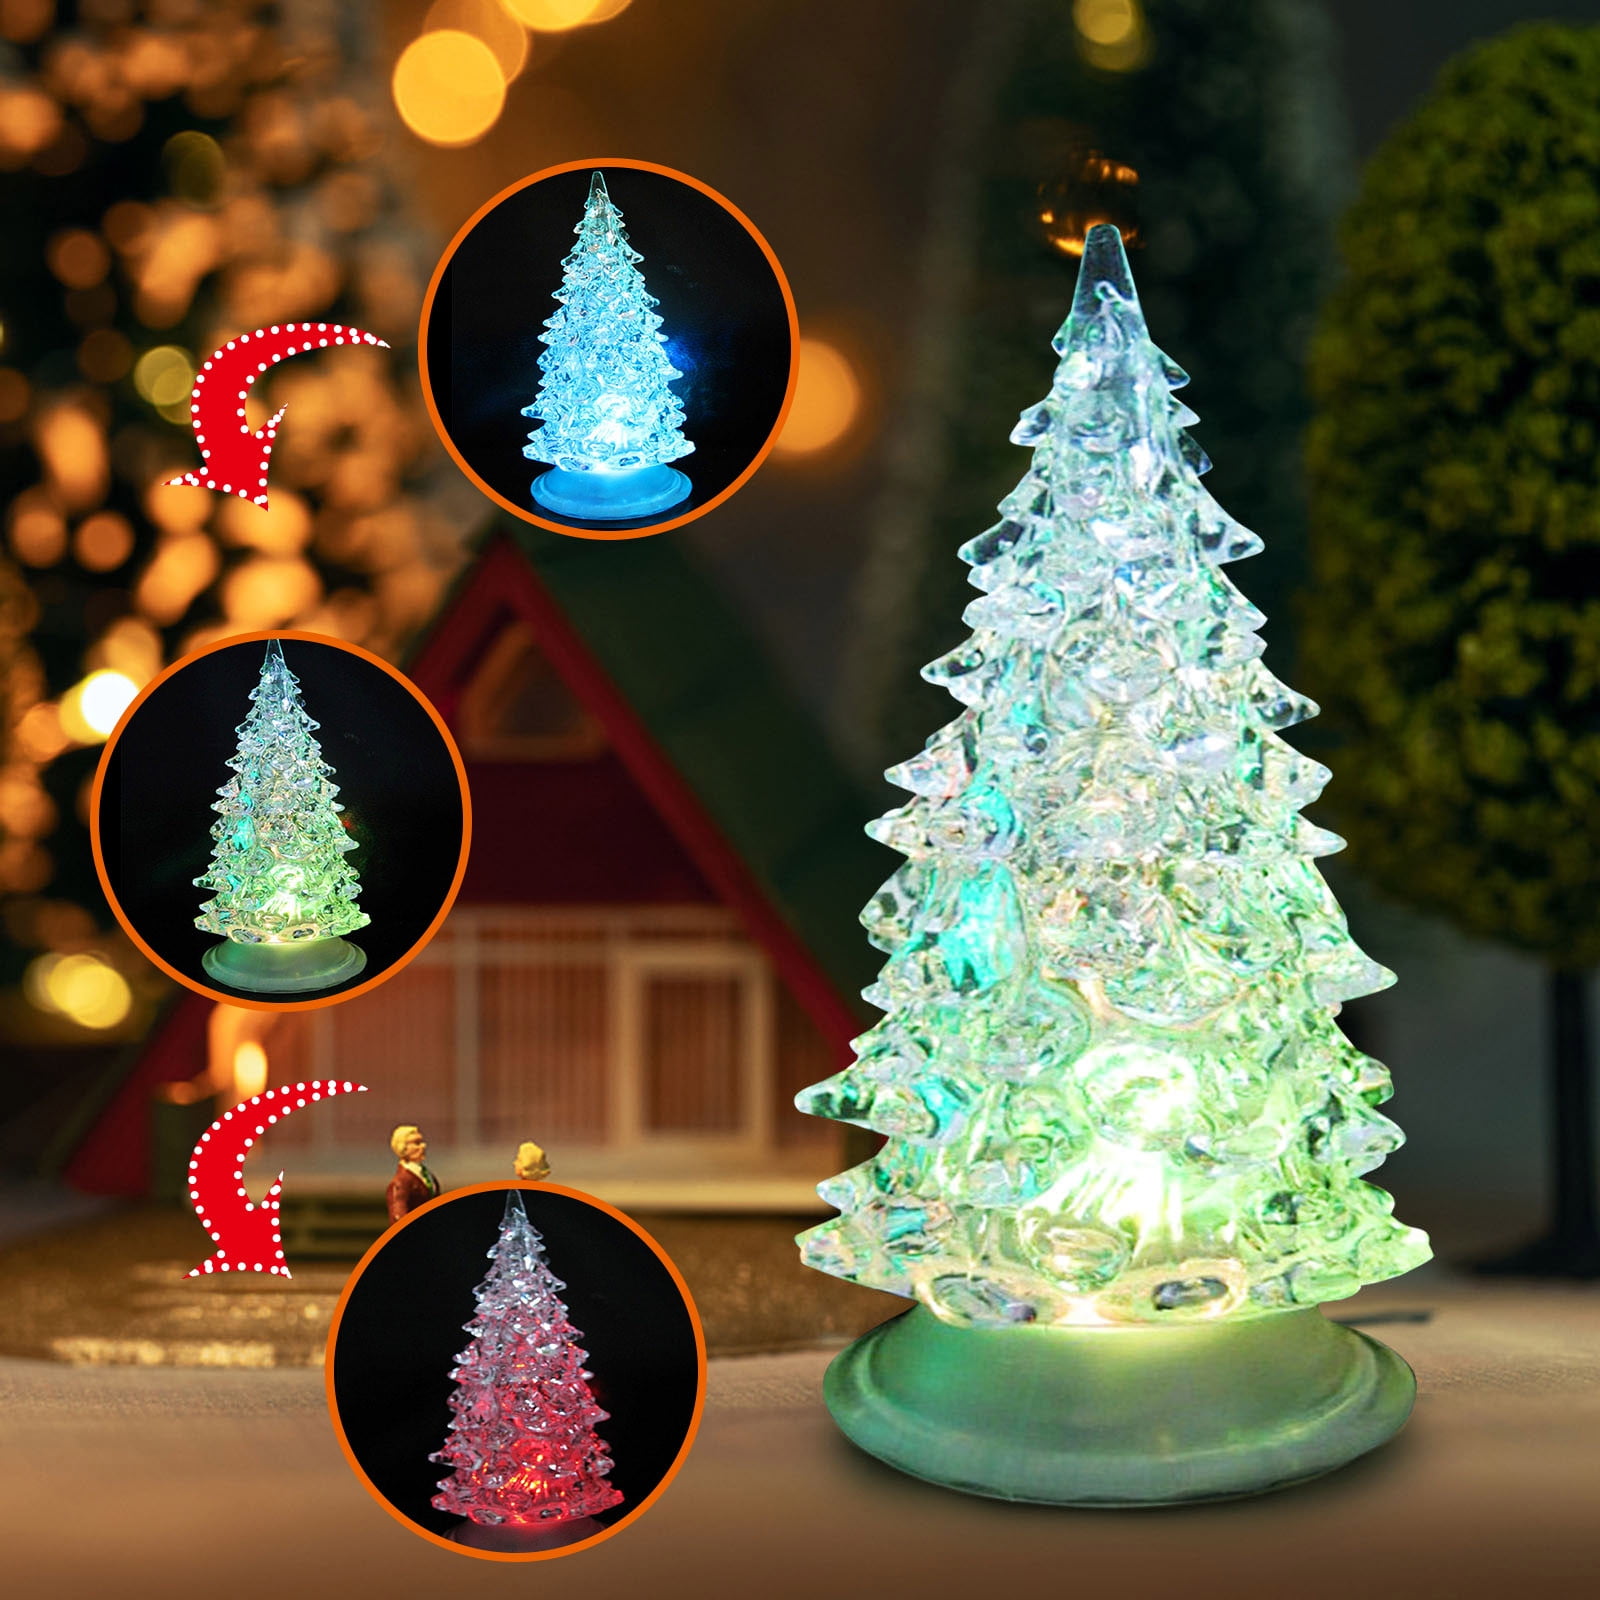 Glowing Crystal Tree (LED Garland) by BF3Design